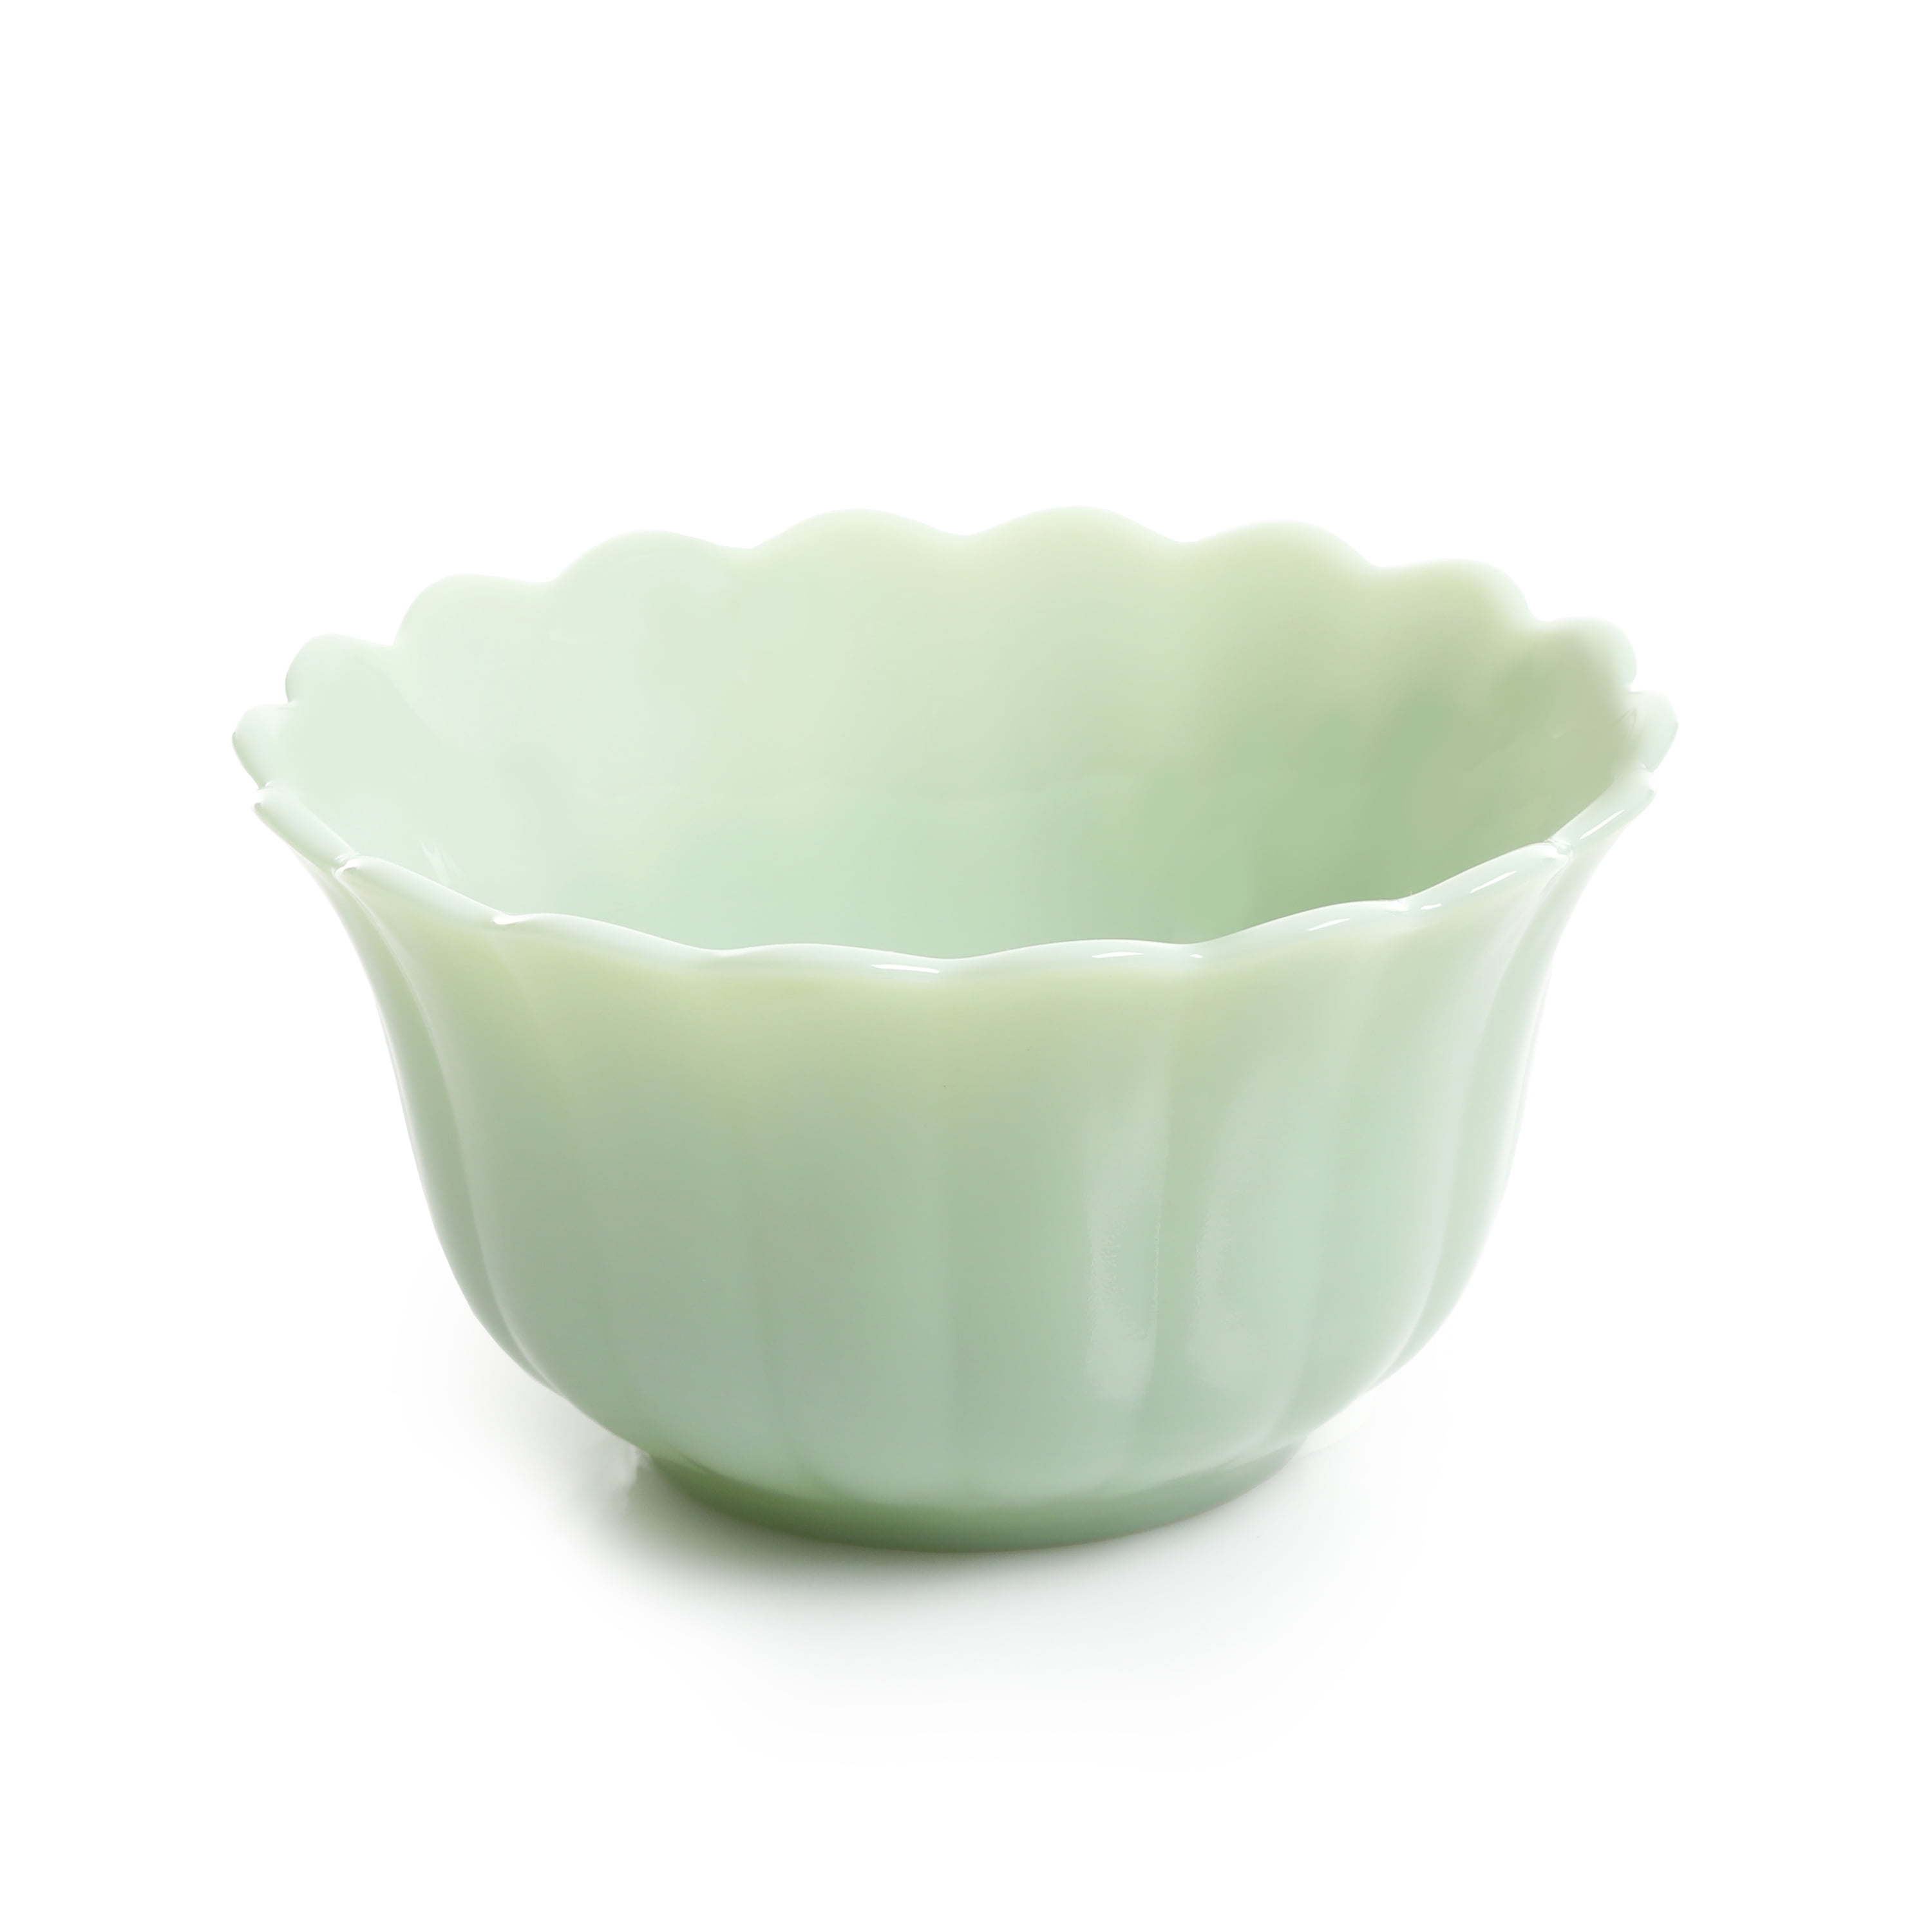 The Pioneer Woman Timeless Beauty Jade 5.3-Inch Bowl